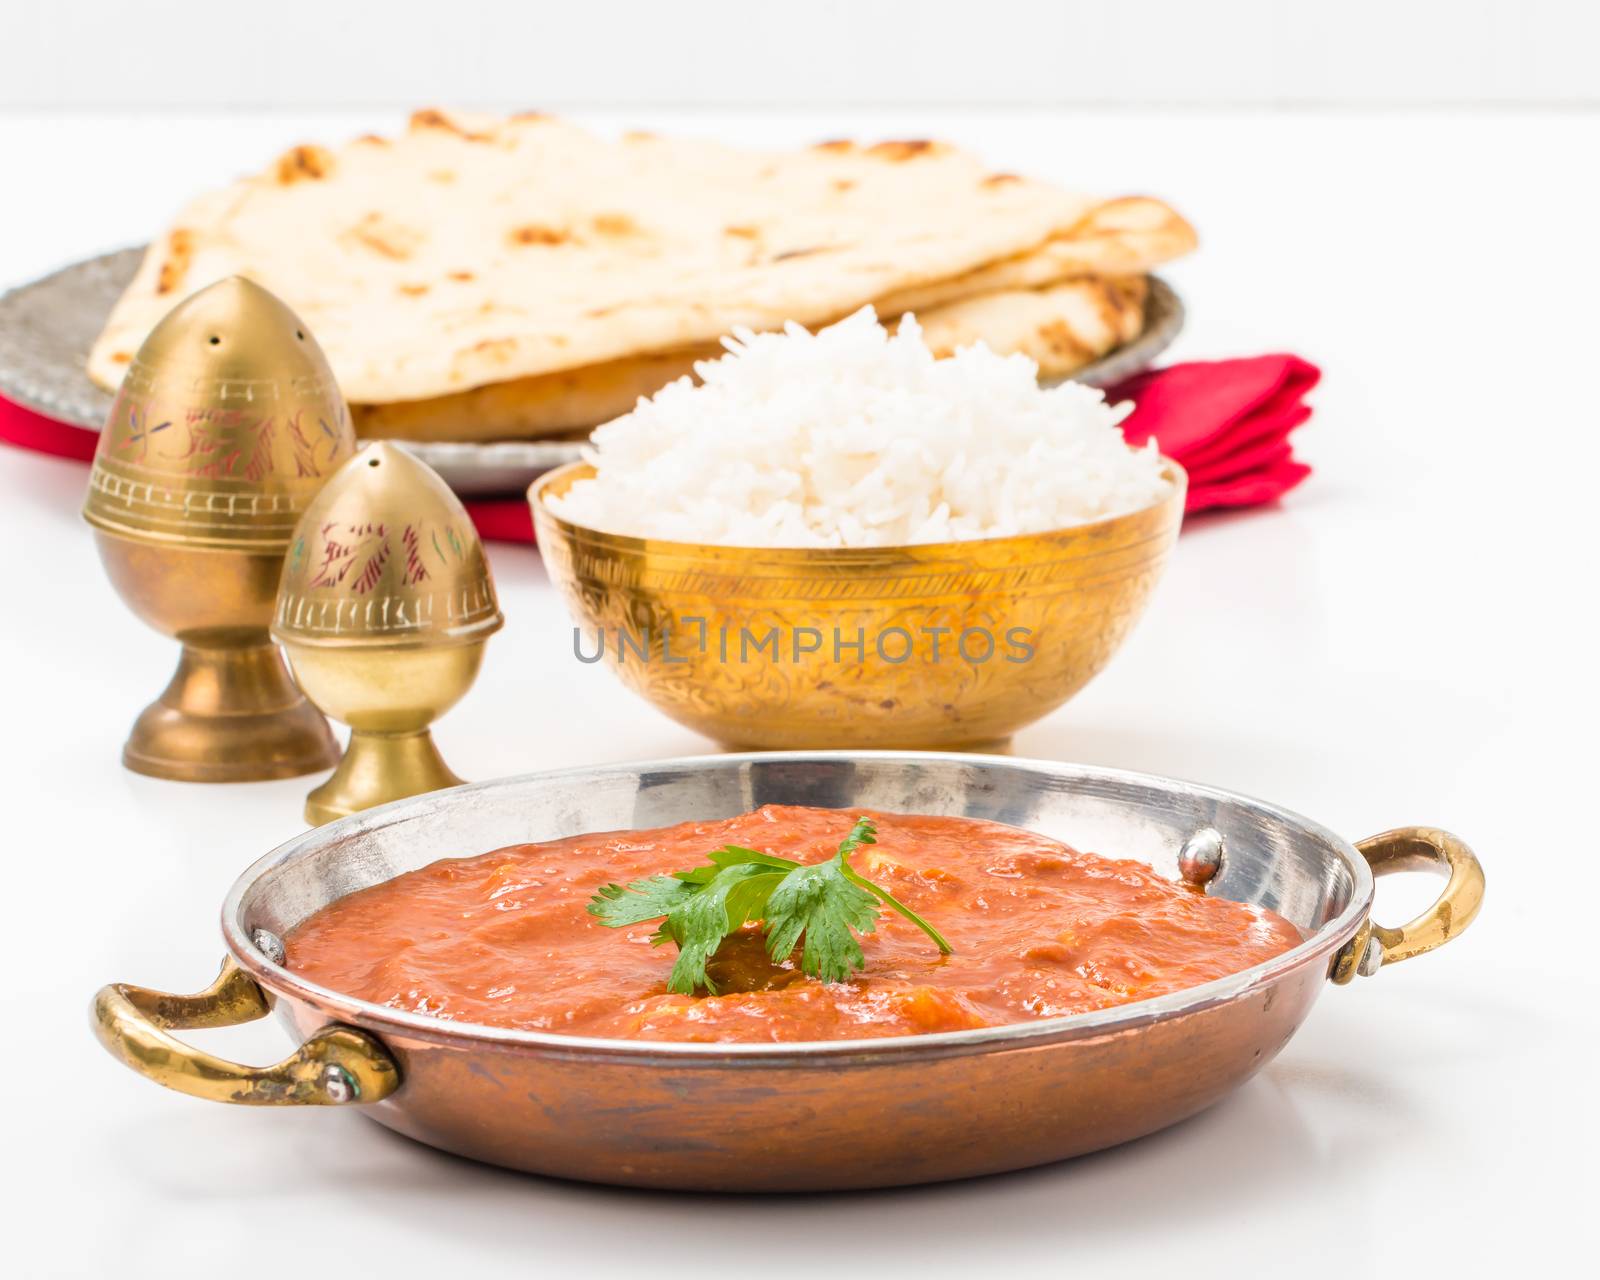 East Indian meal consisting of butter chicken, rice and nan bread.